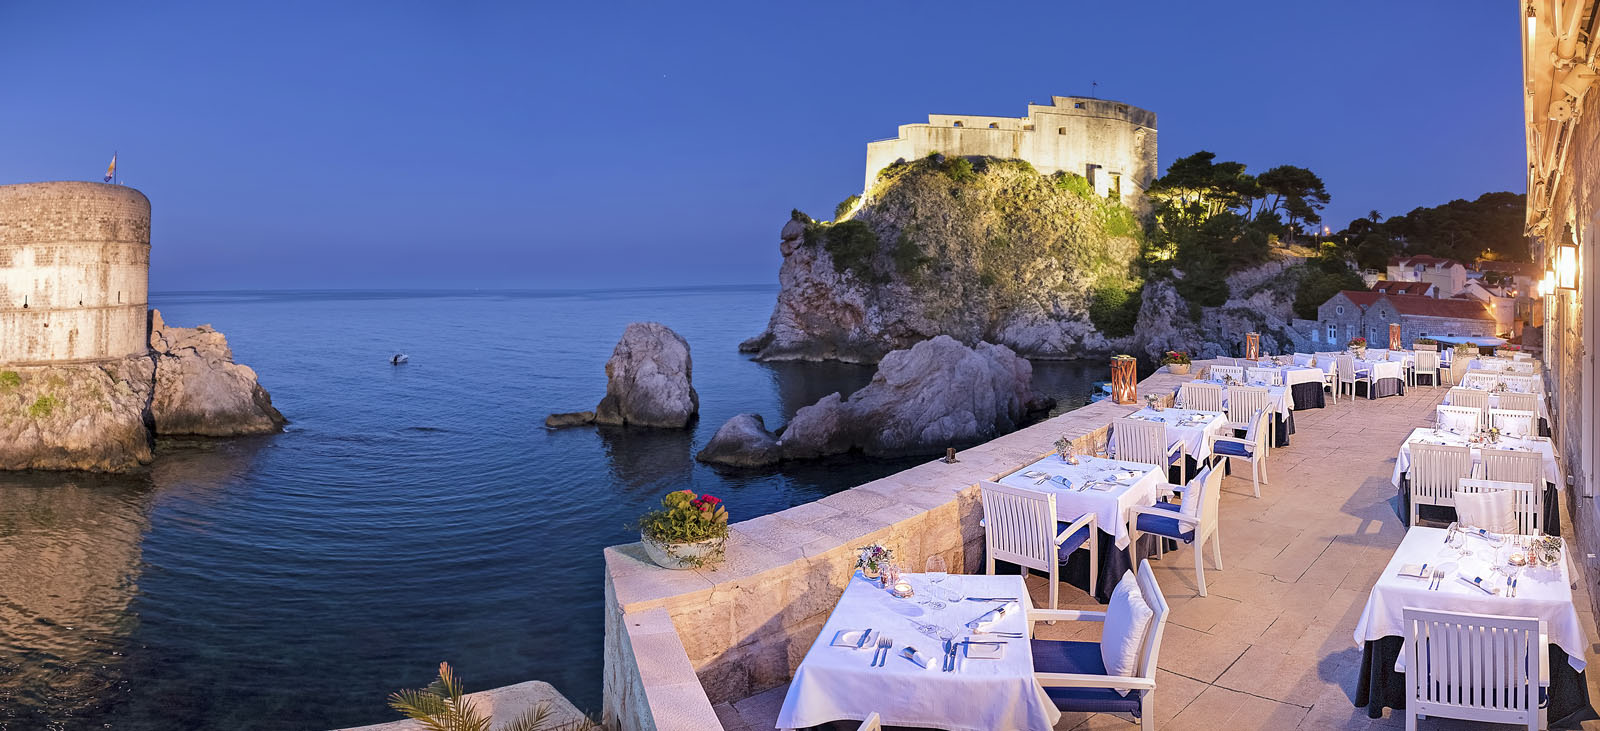 Nautika Restaurant Dubrovnik, Travel to Dubrovnik, travel to Croatia, what to do in Dubrovnik, what to do in Croatia, Weekend getaway in Dubrovnik, Erin Busbee, Busbee Style, Beauty Over 40